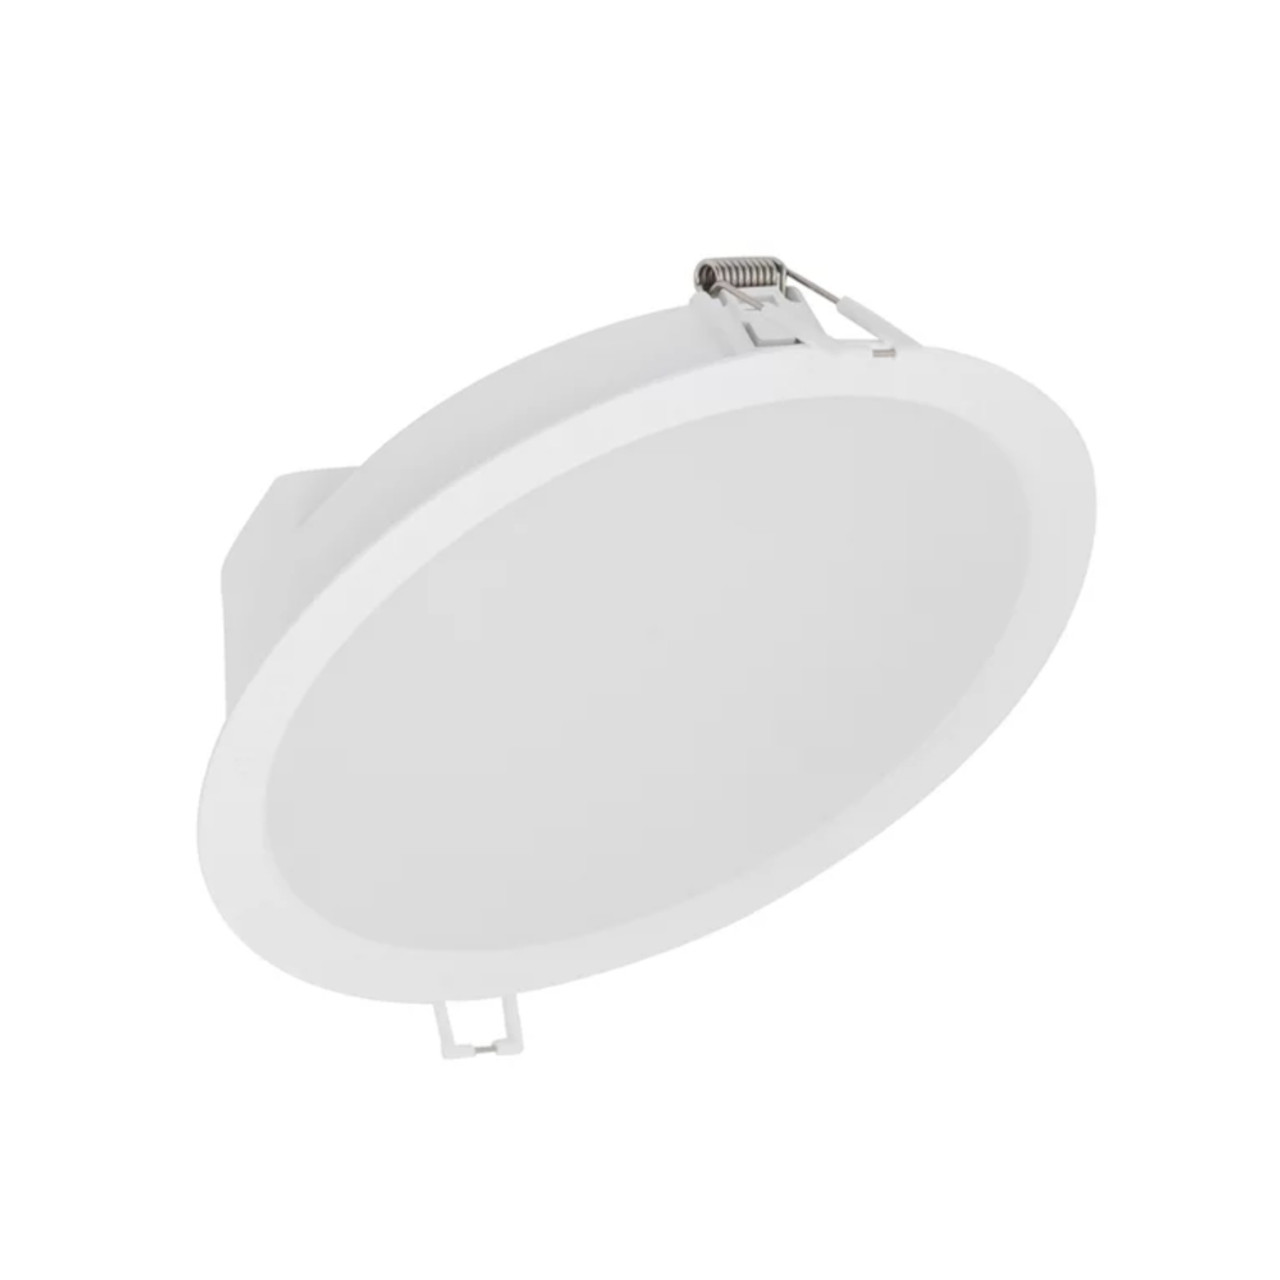 LED Downlight 13W 1300lm 3000K IP44 100 Degrees 150mm Cut Out Ledvance